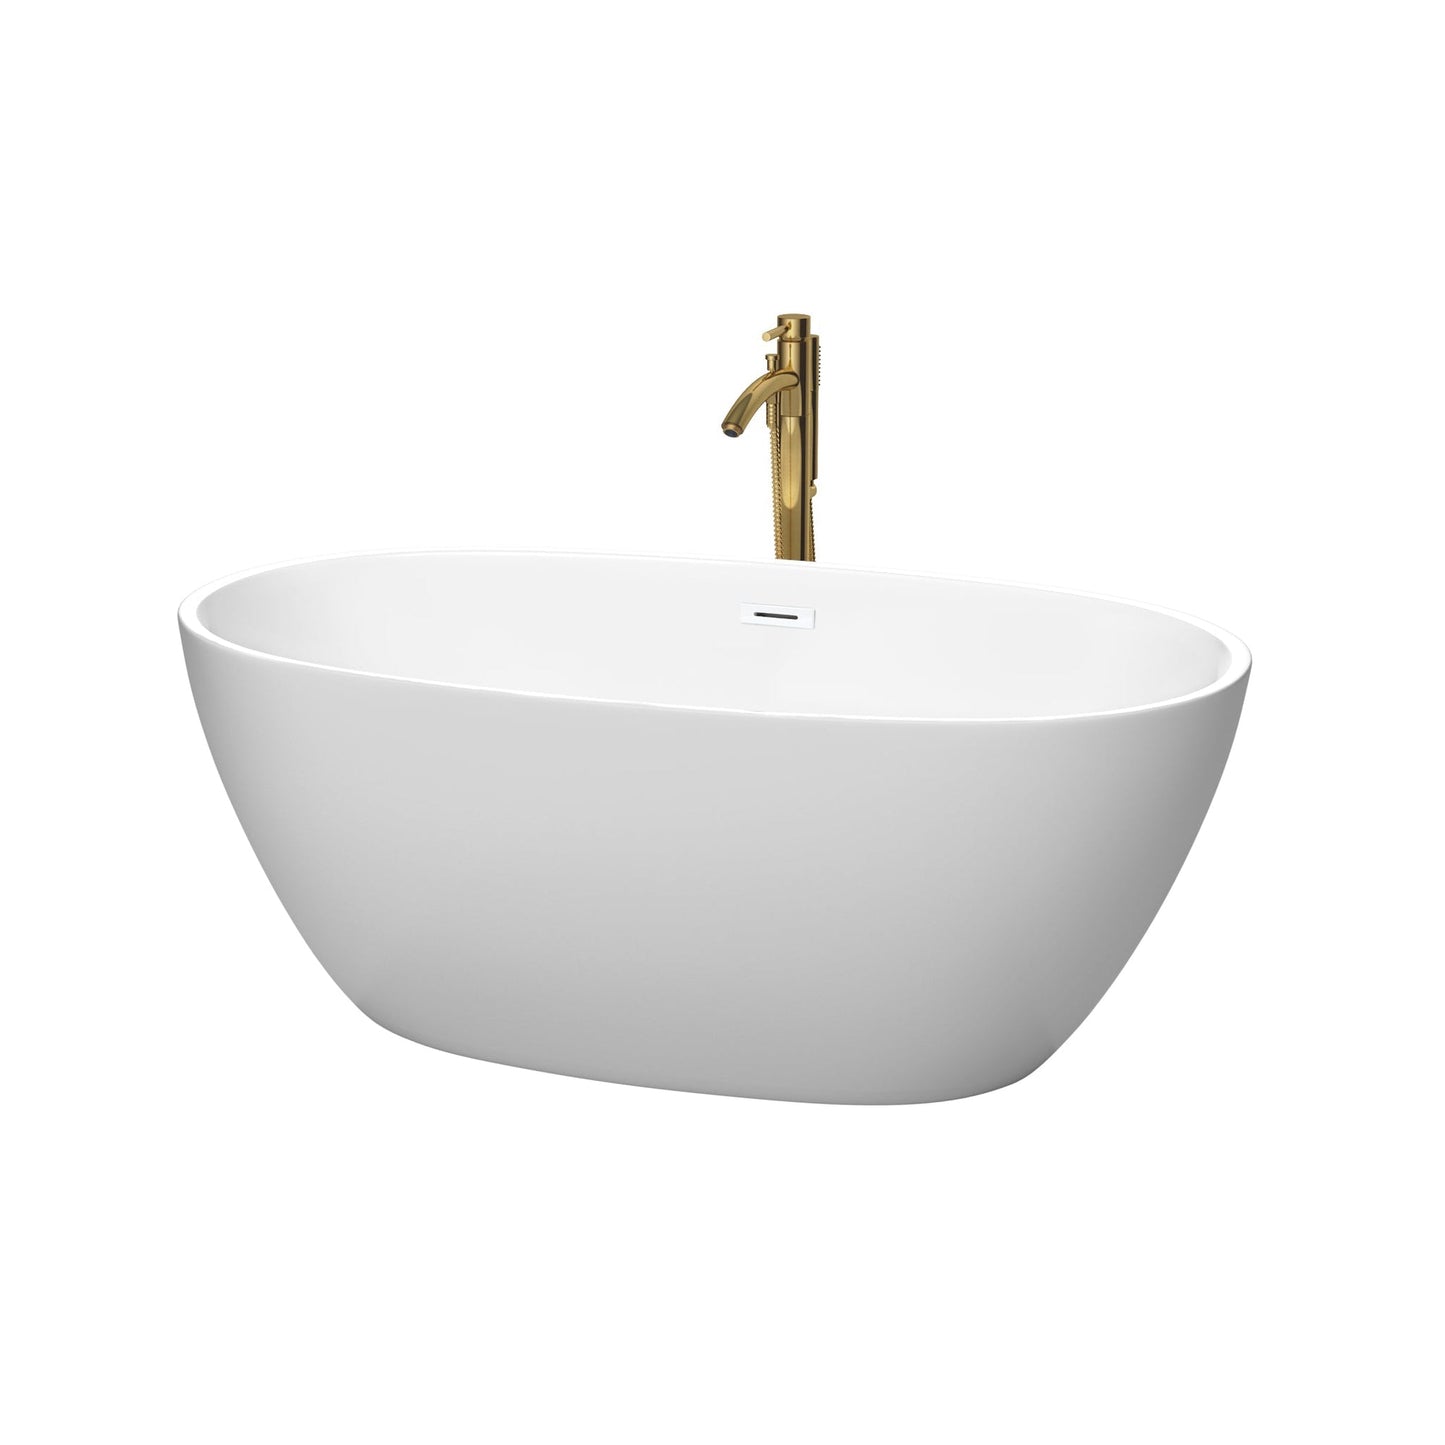 Wyndham Collection Juno 59" Freestanding Bathtub in Matte White With Shiny White Trim and Floor Mounted Faucet in Brushed Gold